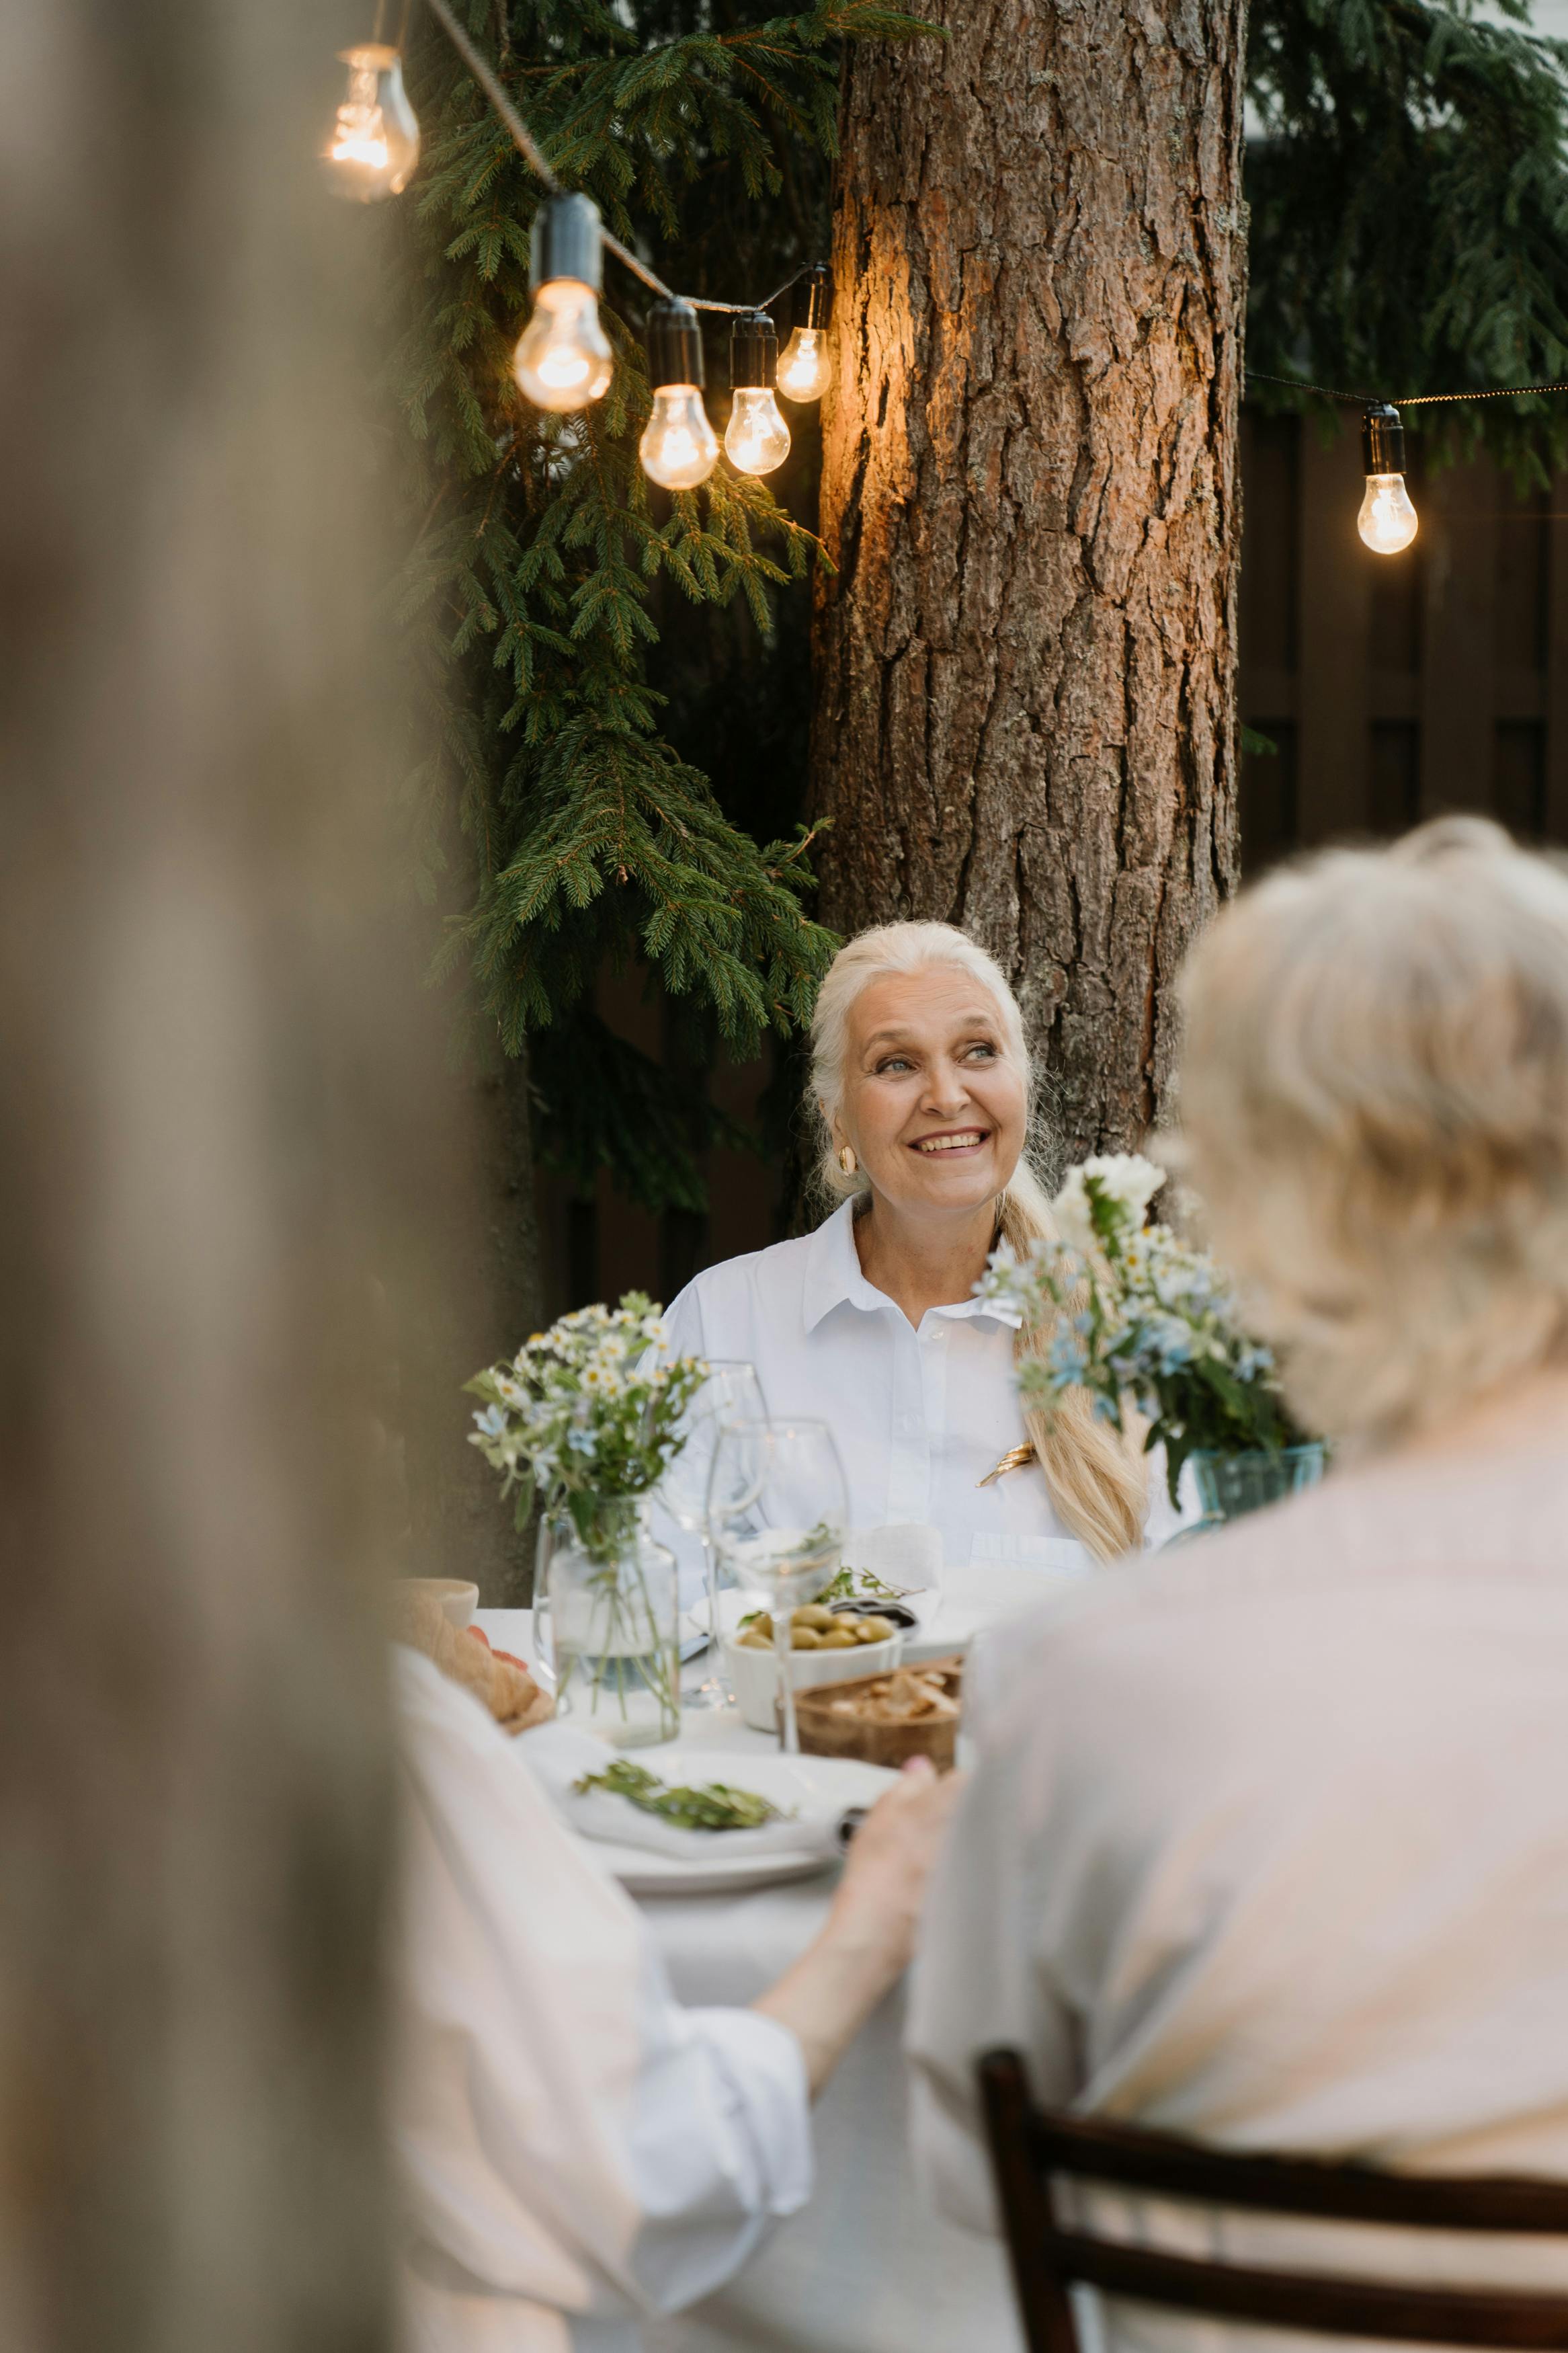 A woman saying something while surrounded by friends at an event | Source: Pexels